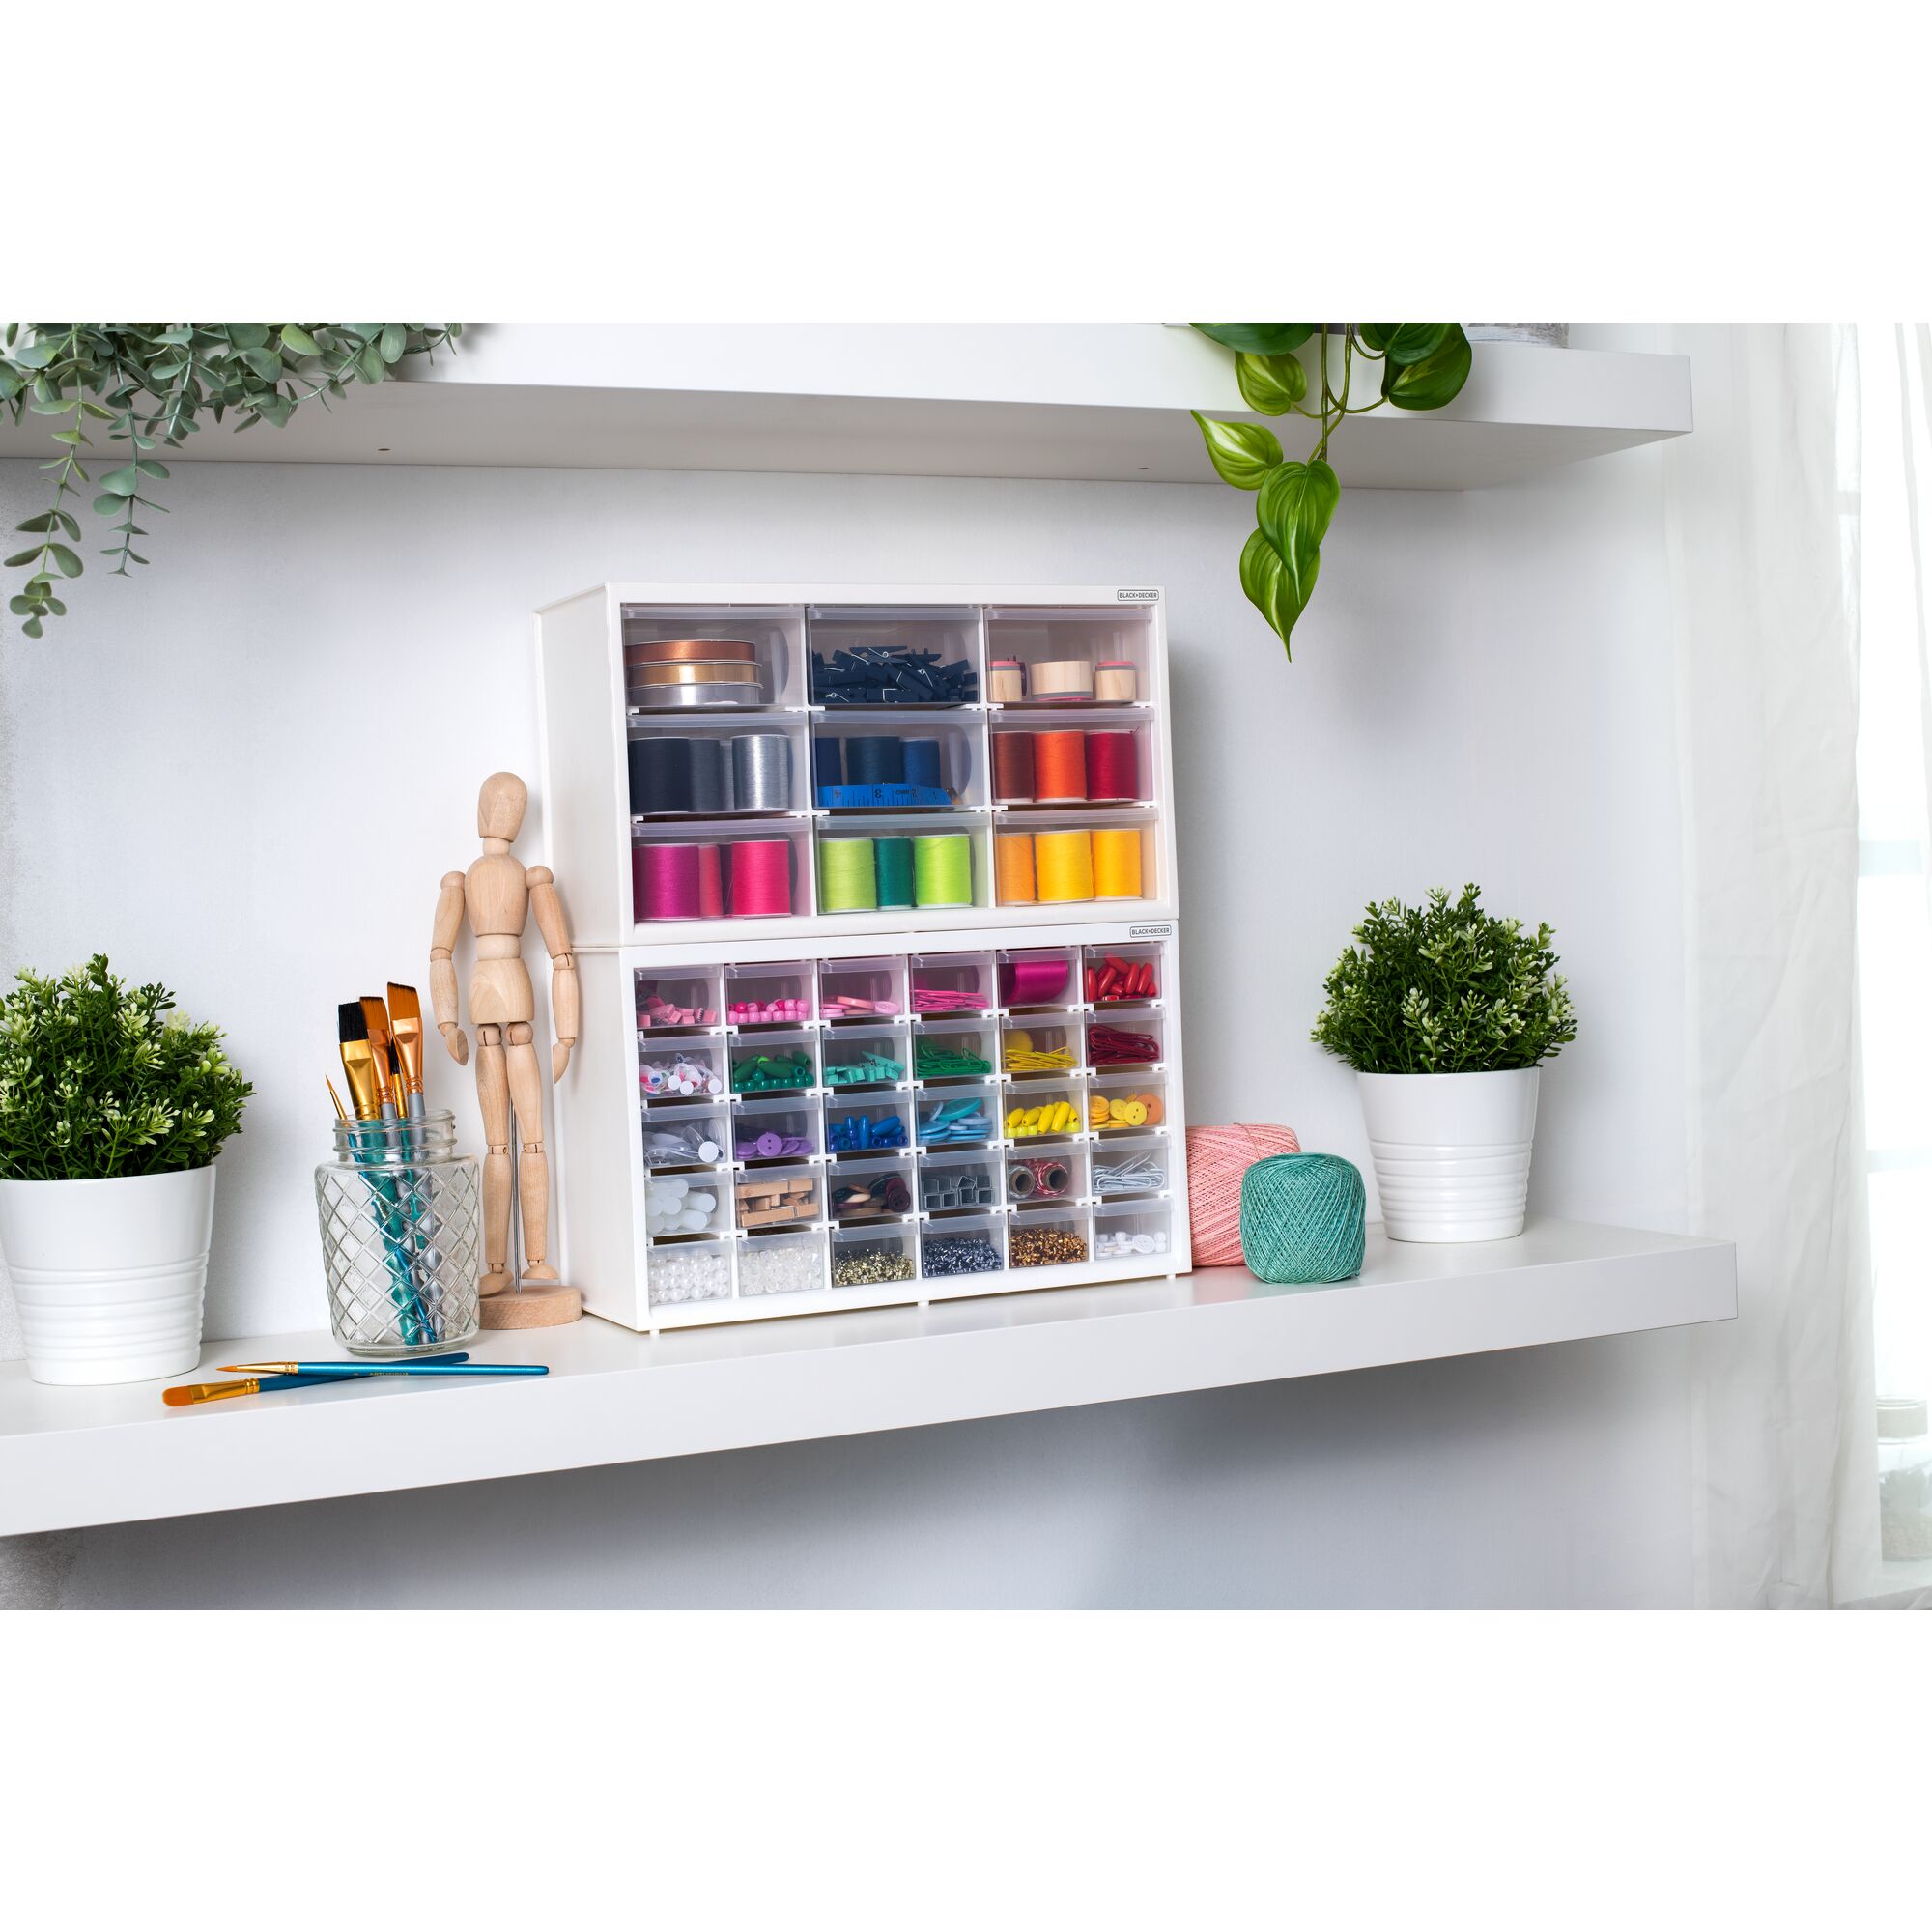 Two BLACK+DECKER material bins filled with various colorful crafting materials stacked on top of each other sitting on a shelf